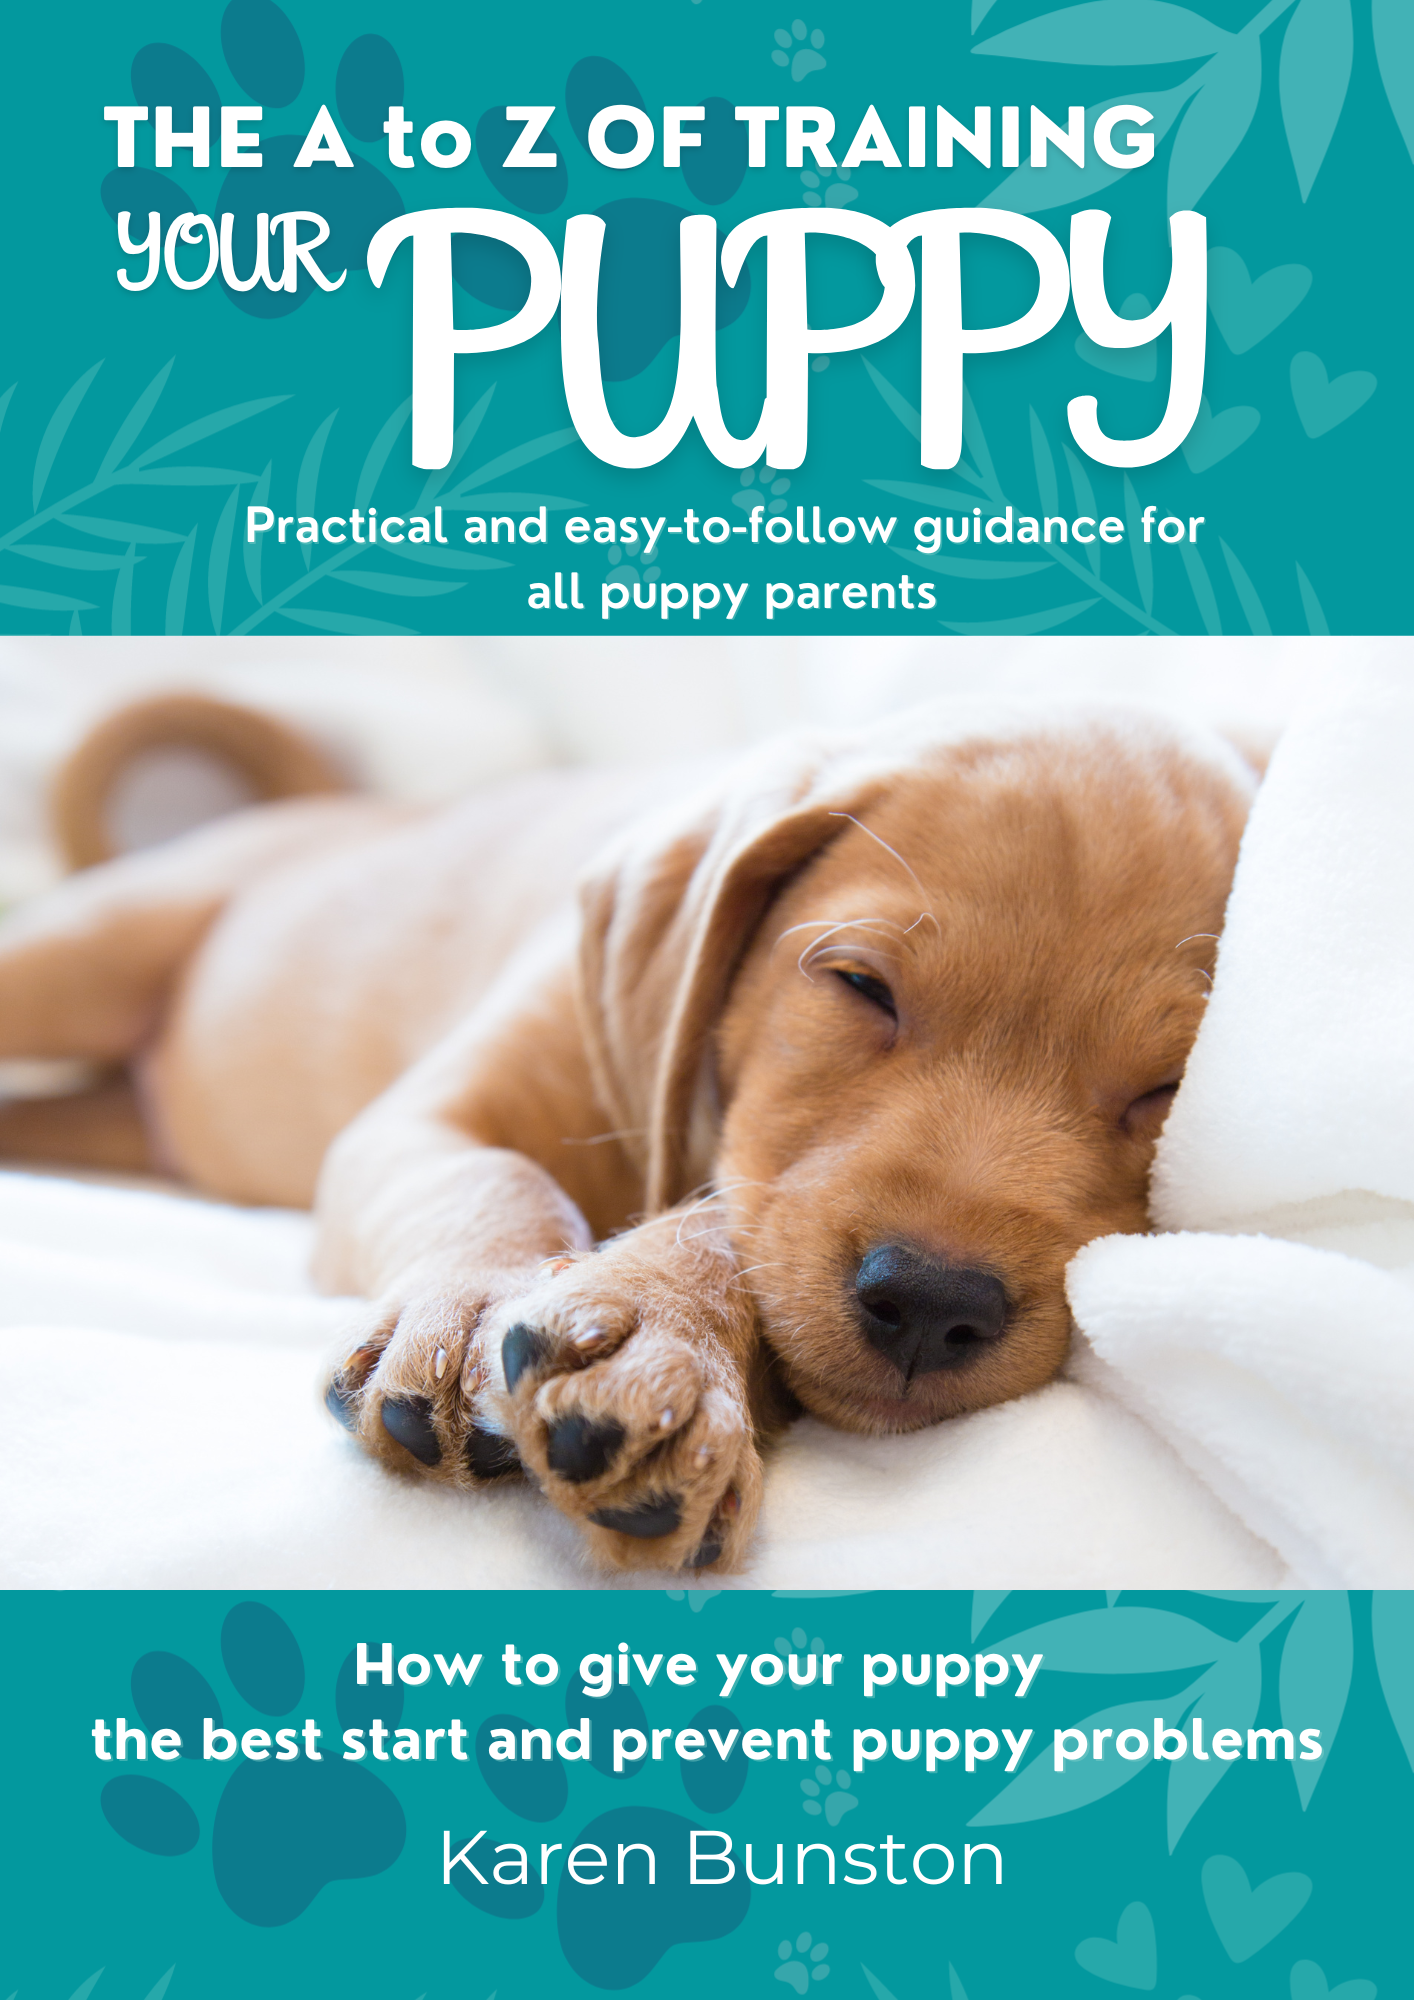 The A to Z of training your puppy ebook